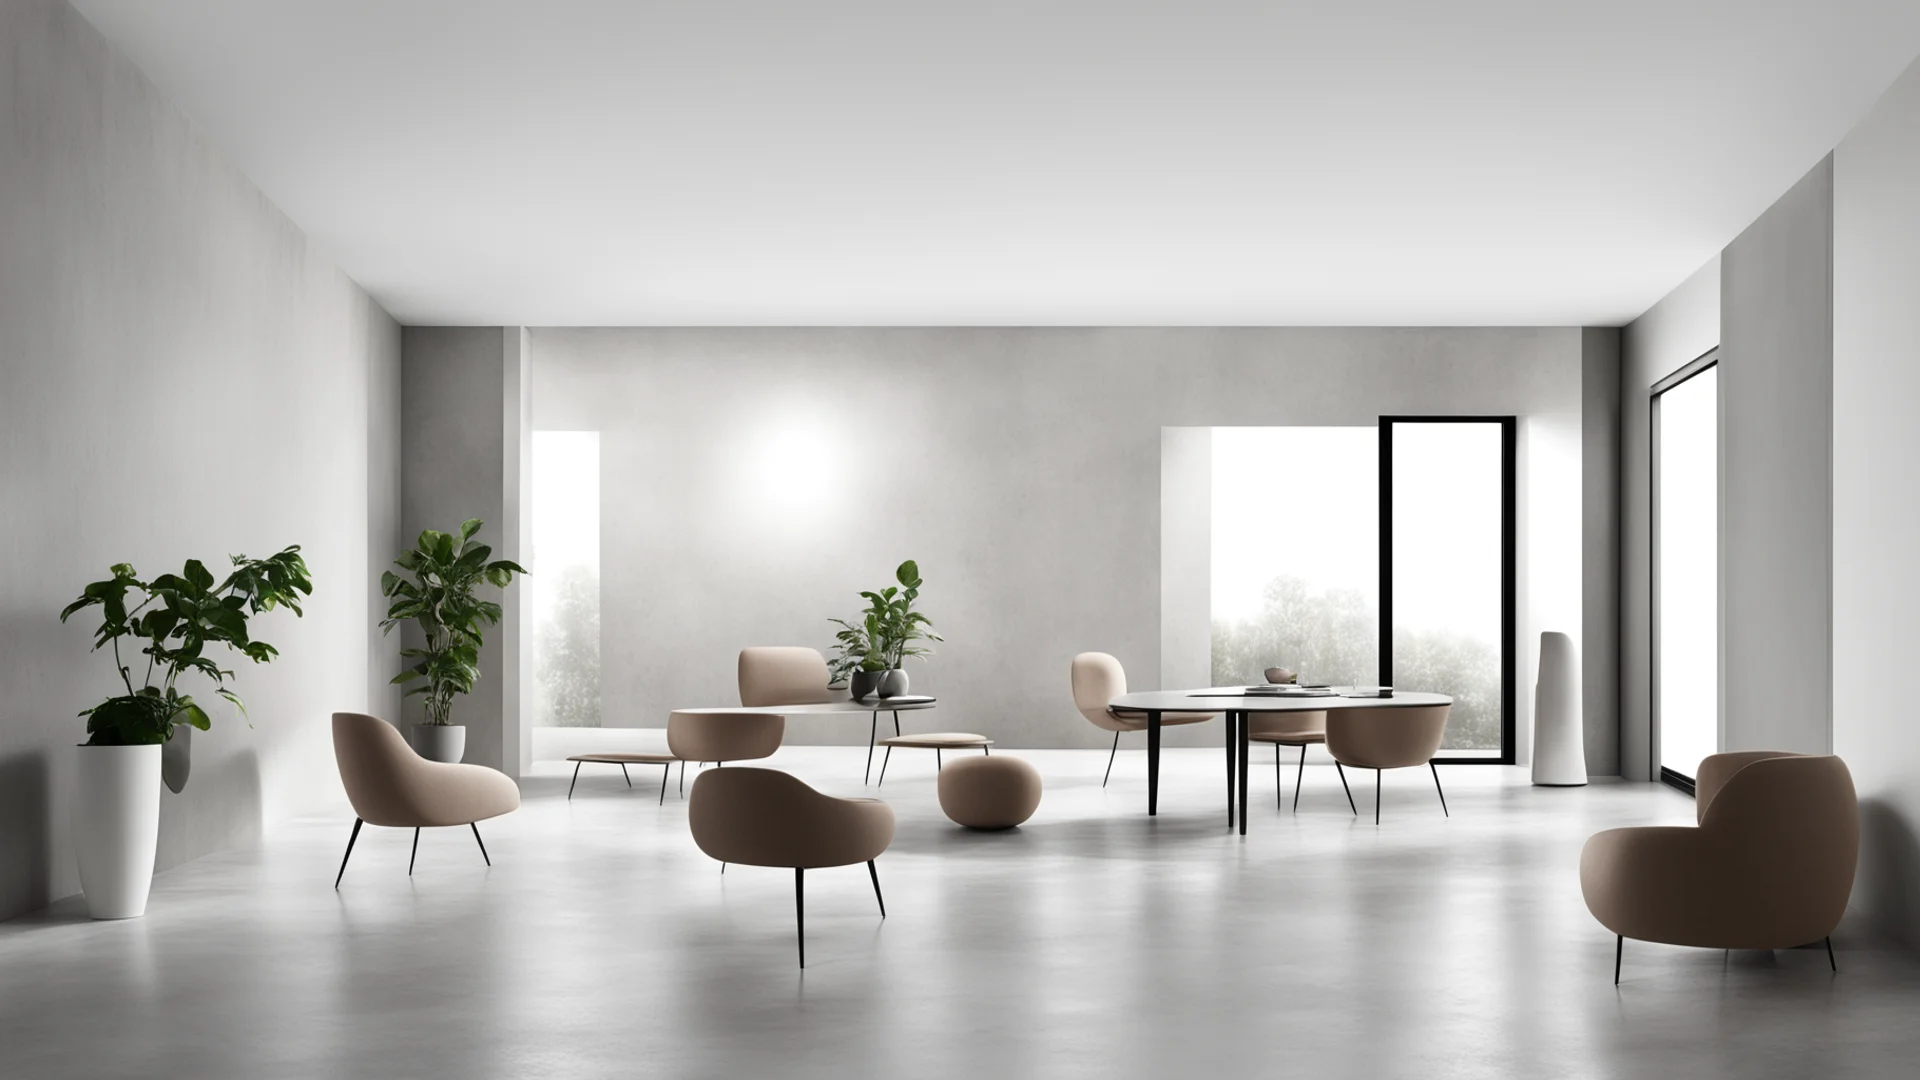  minimal interior space   no chairs  wide